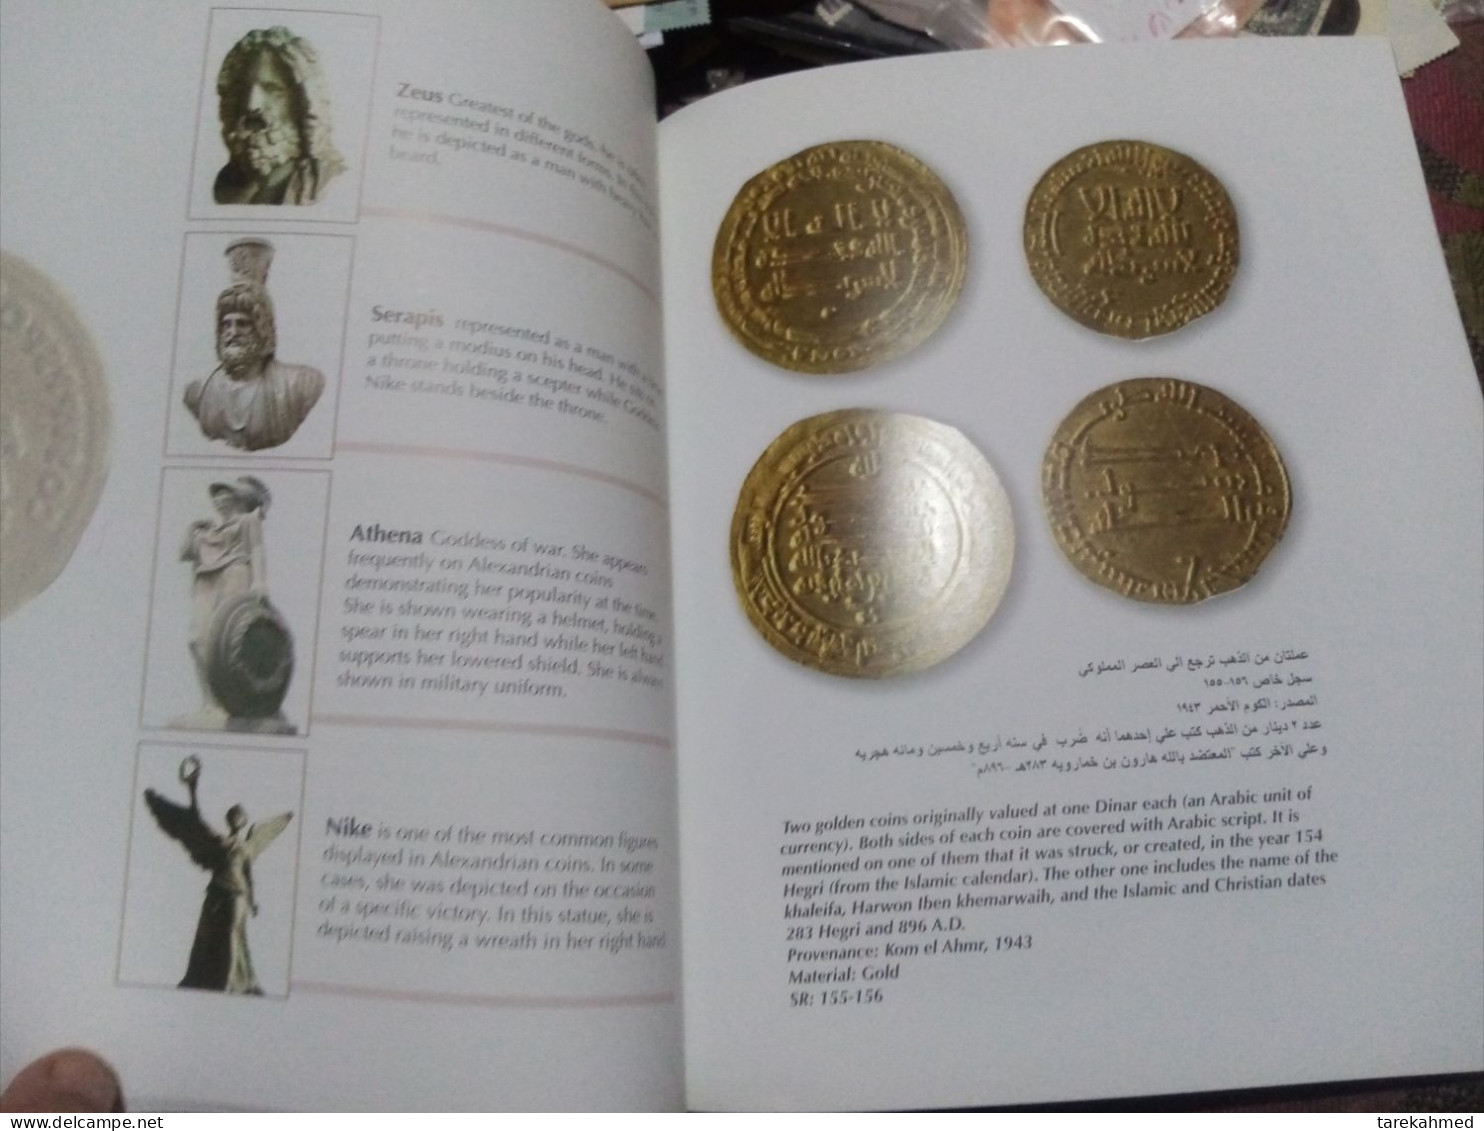 Egypt 2010, Egyptian museum series,Rare encyclopedia of "coins through the ages" 50 High resolution painted pages, dolab